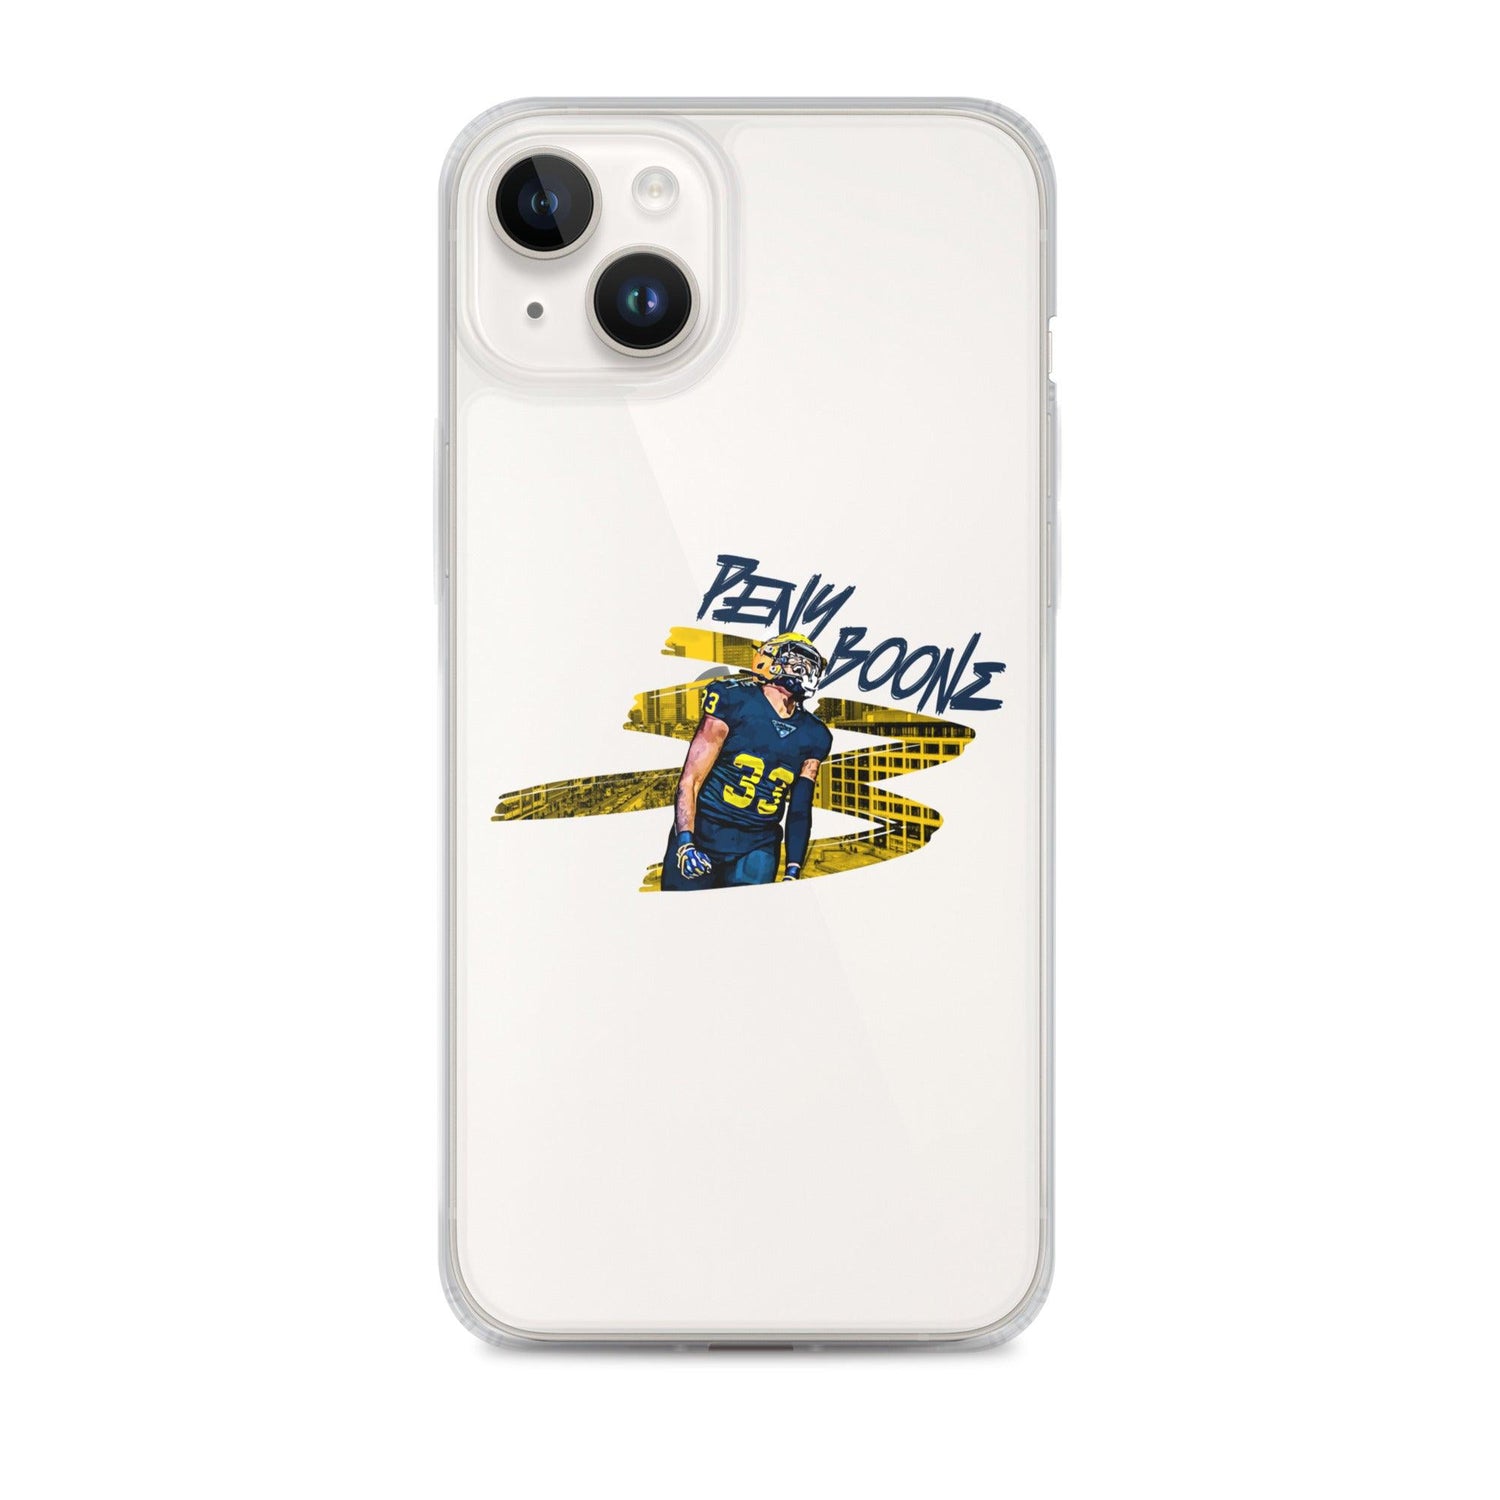 Peny Boone "Gameday" iPhone Case - Fan Arch